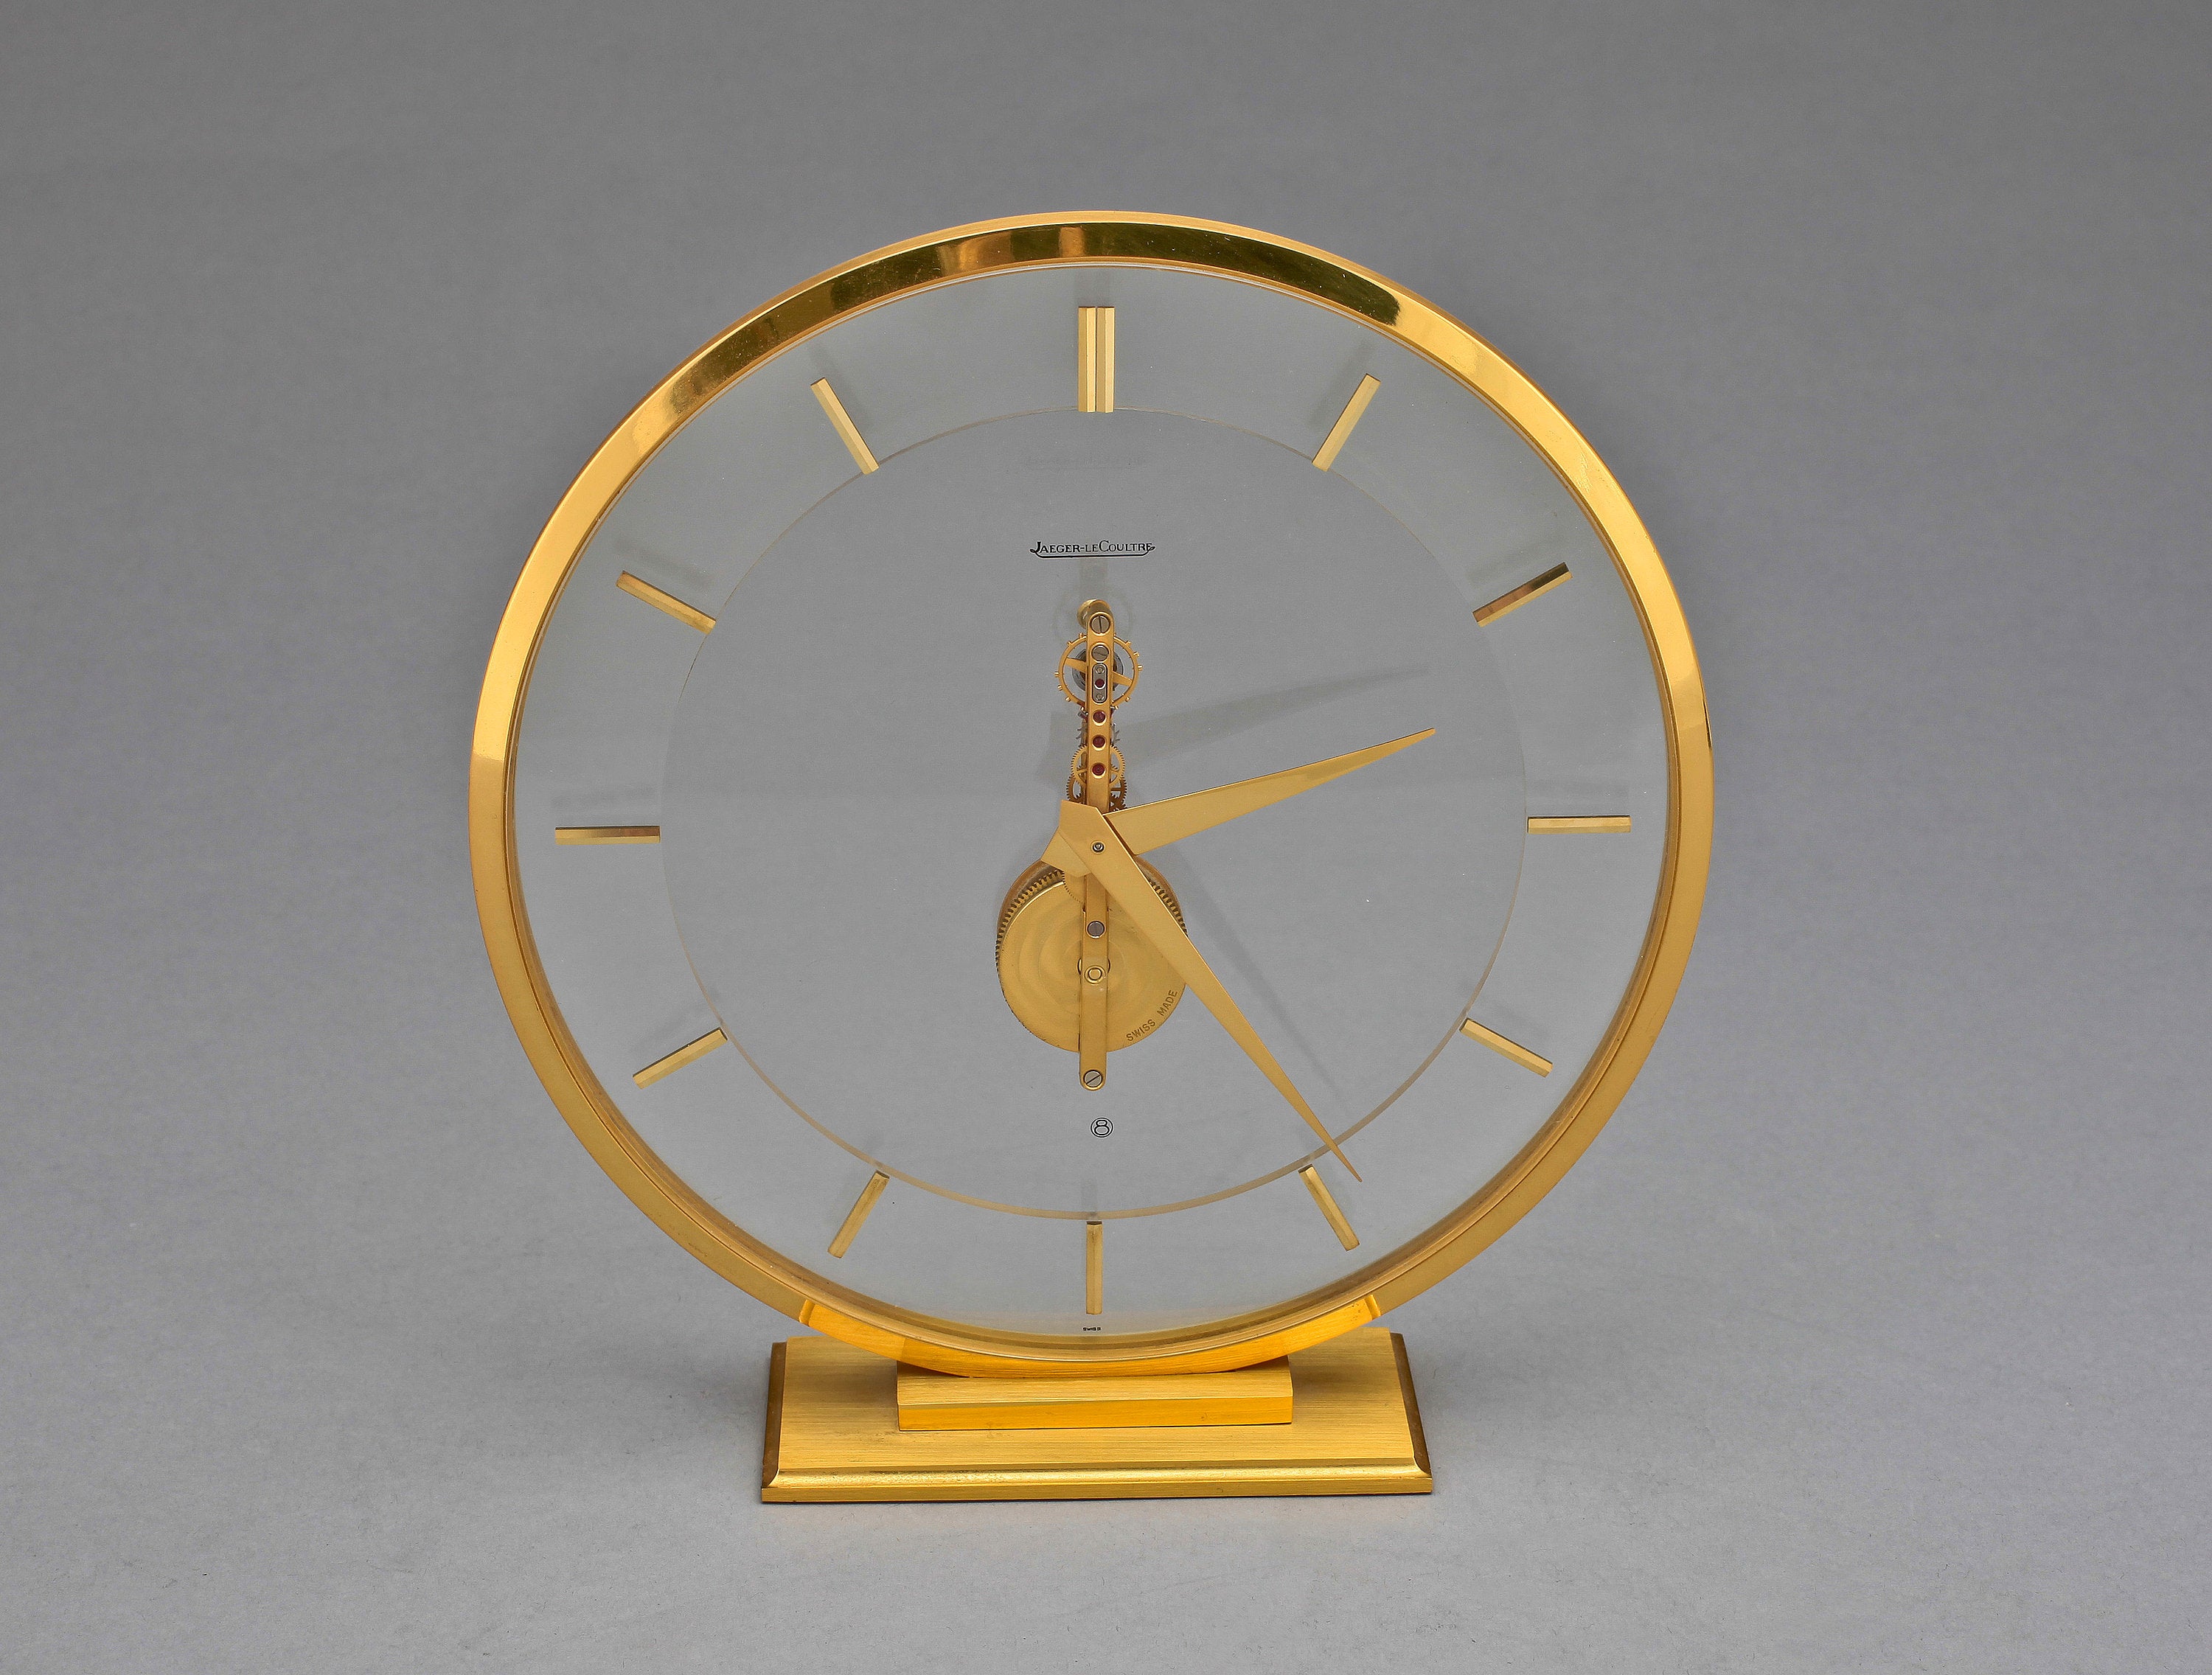 Jeager Lecoultre Rare Skeleton Clock Plexiglas and Brass. 8-Day Movement. Marked For Sale